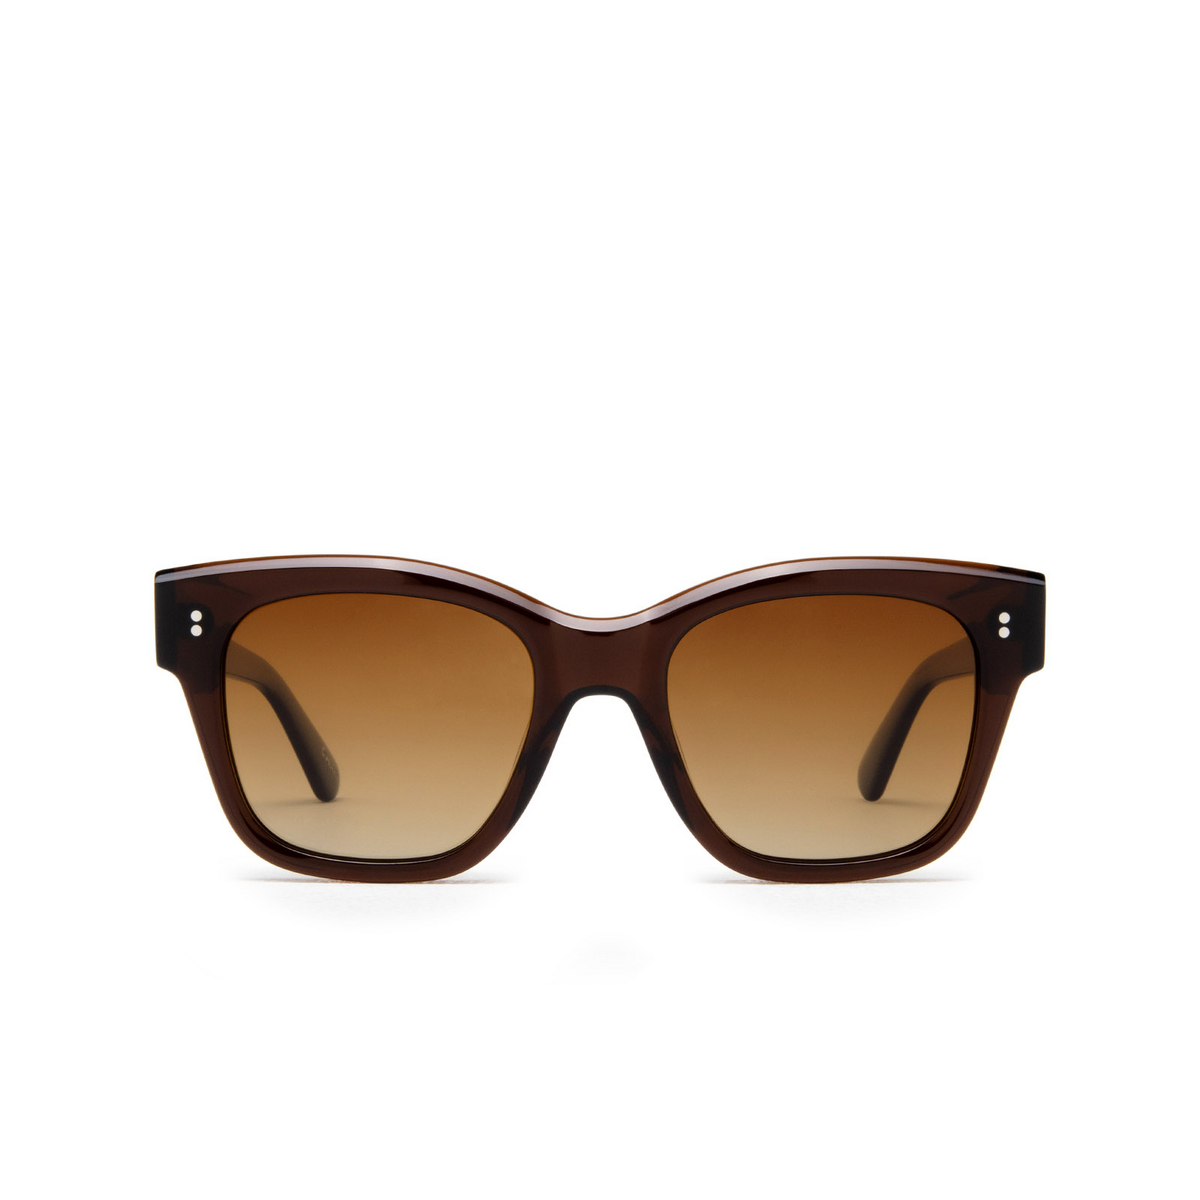 Chimi® Butterfly Sunglasses: 07 color Brown - front view